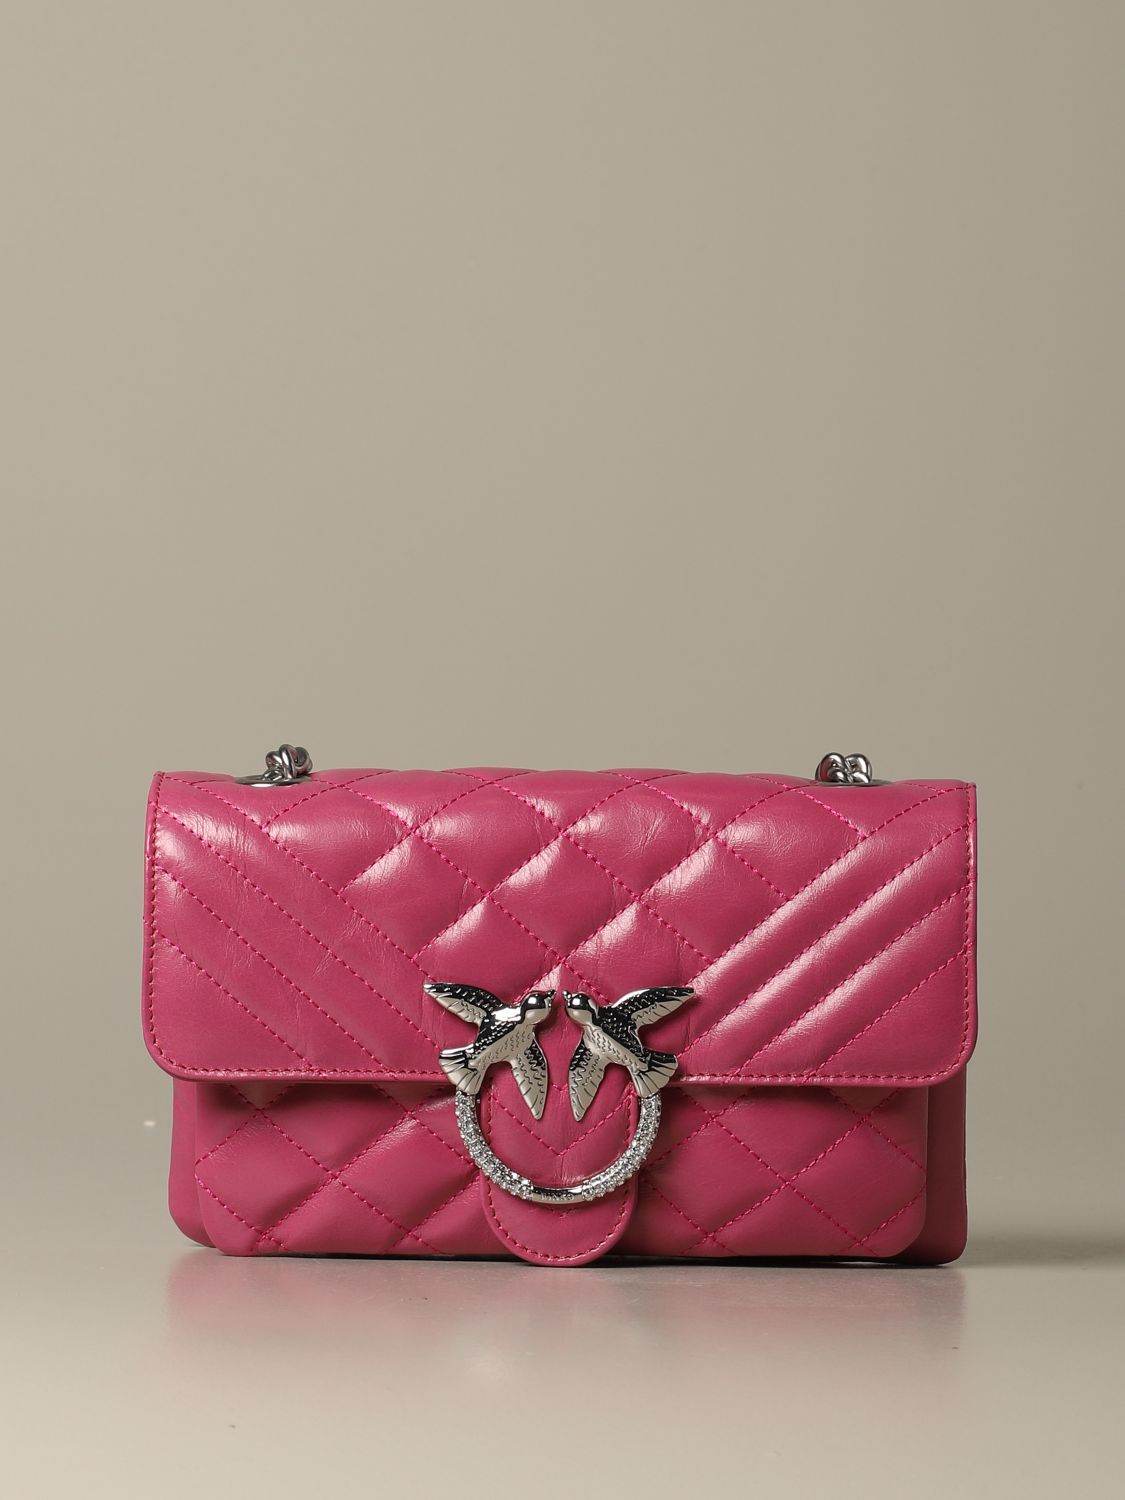 Pinko Outlet: Love mini soft mix bag in vintage quilted leather ...